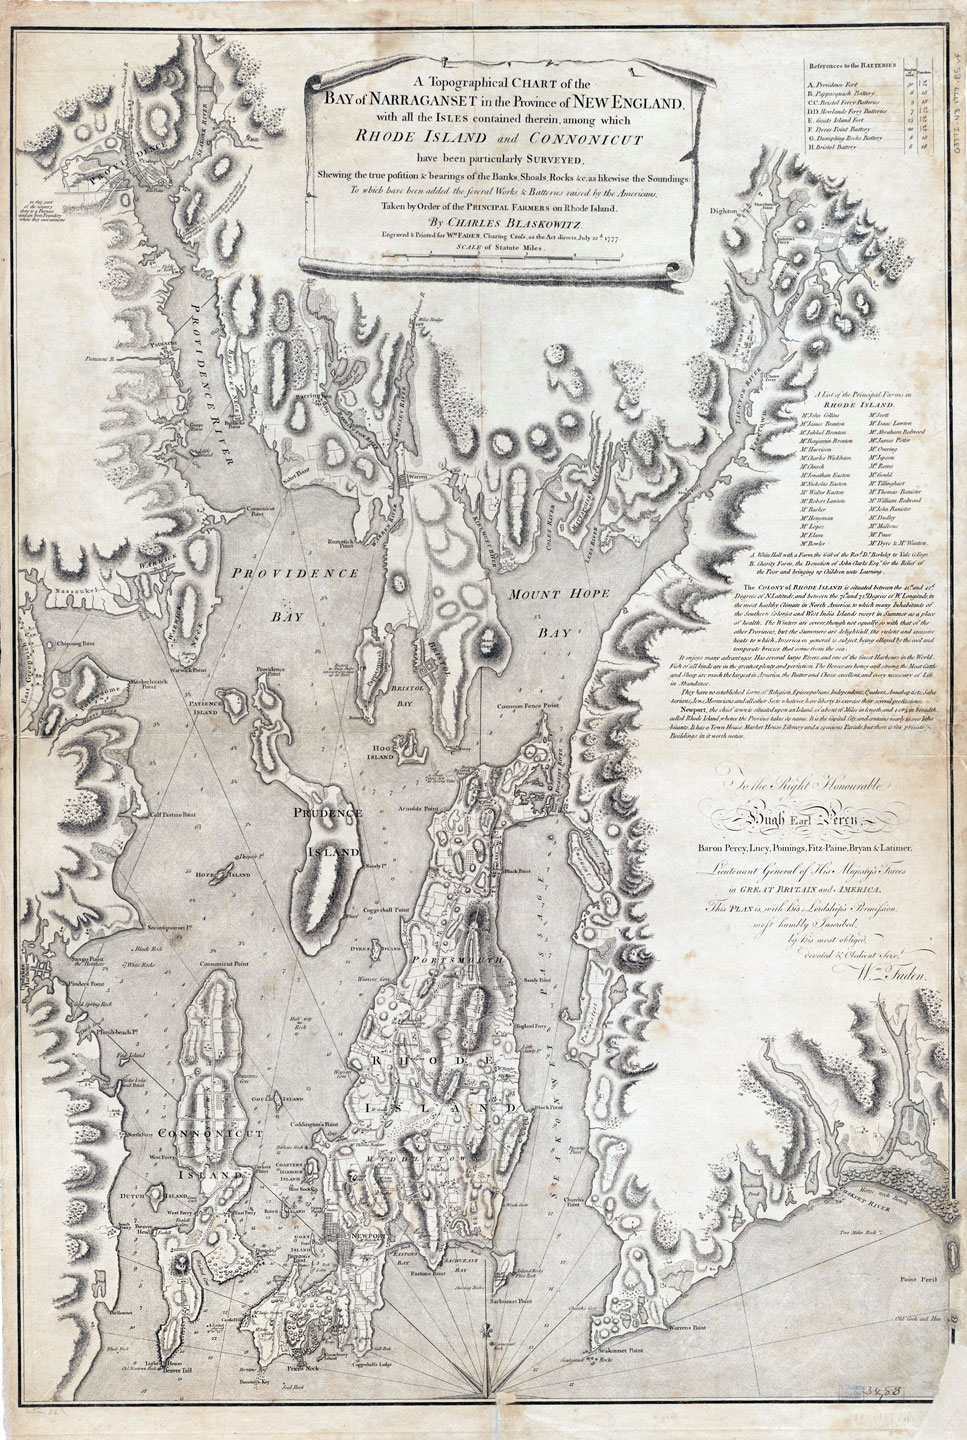  A topographical chart of the bay of Narragansett - 1777